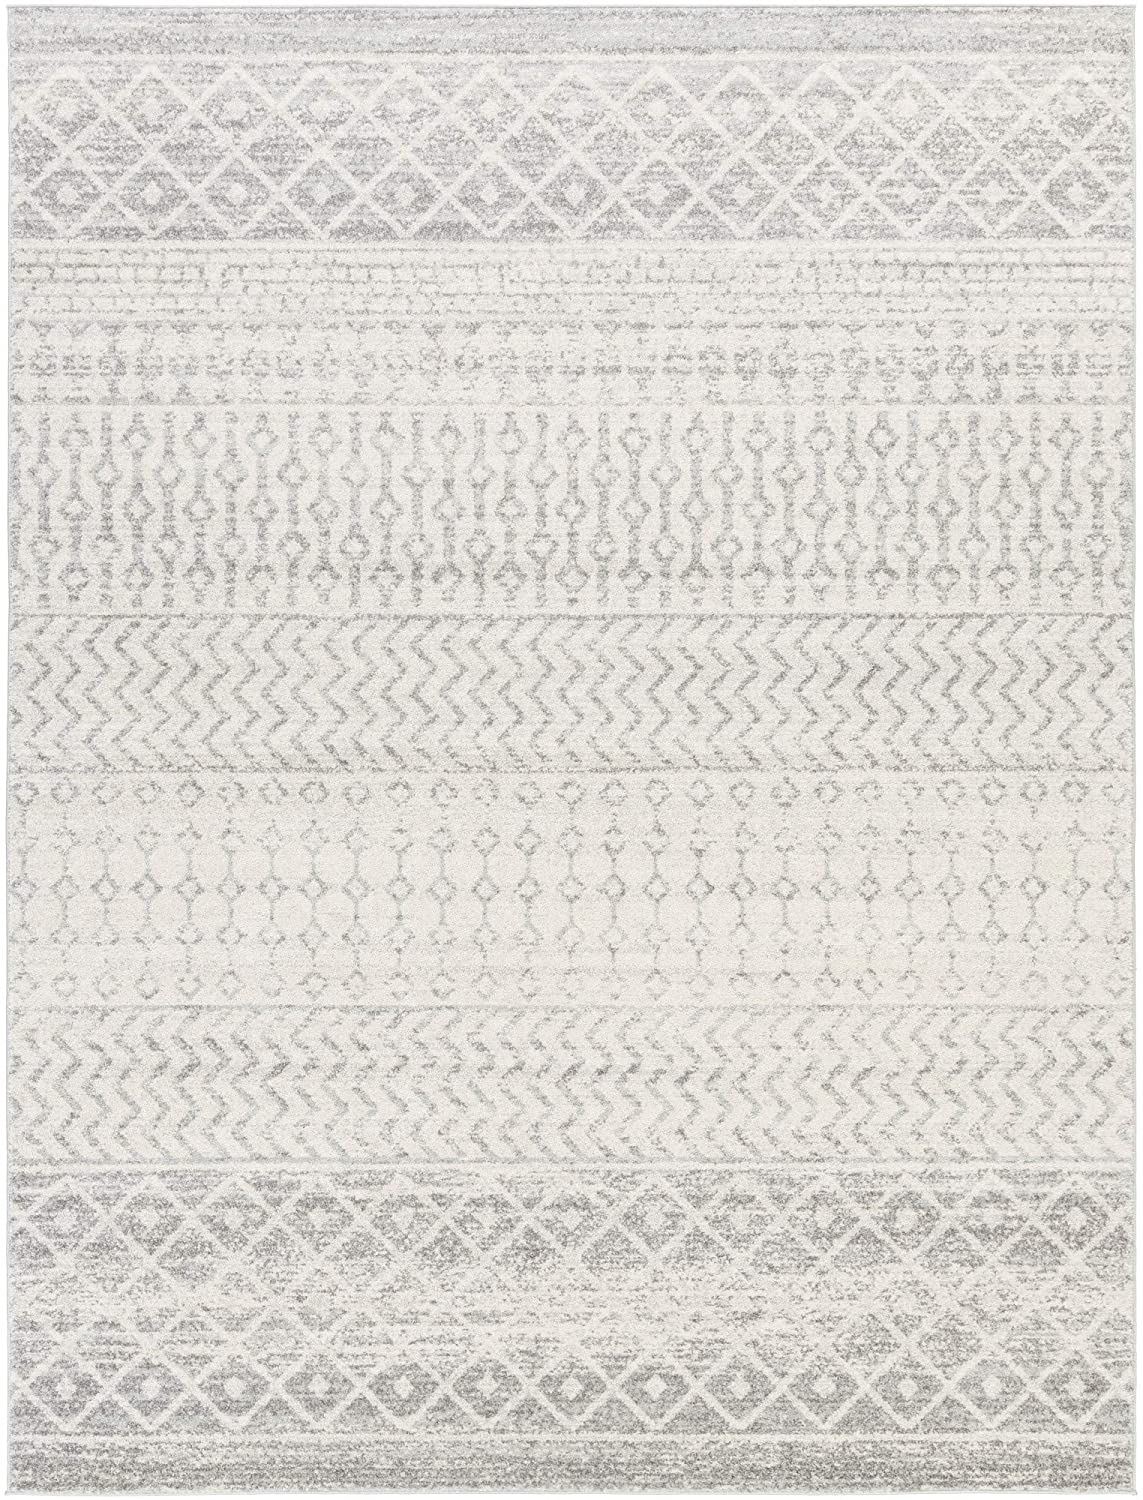 Artistic Weavers Chester Grey Area Rug, 3'11" x 5'7"